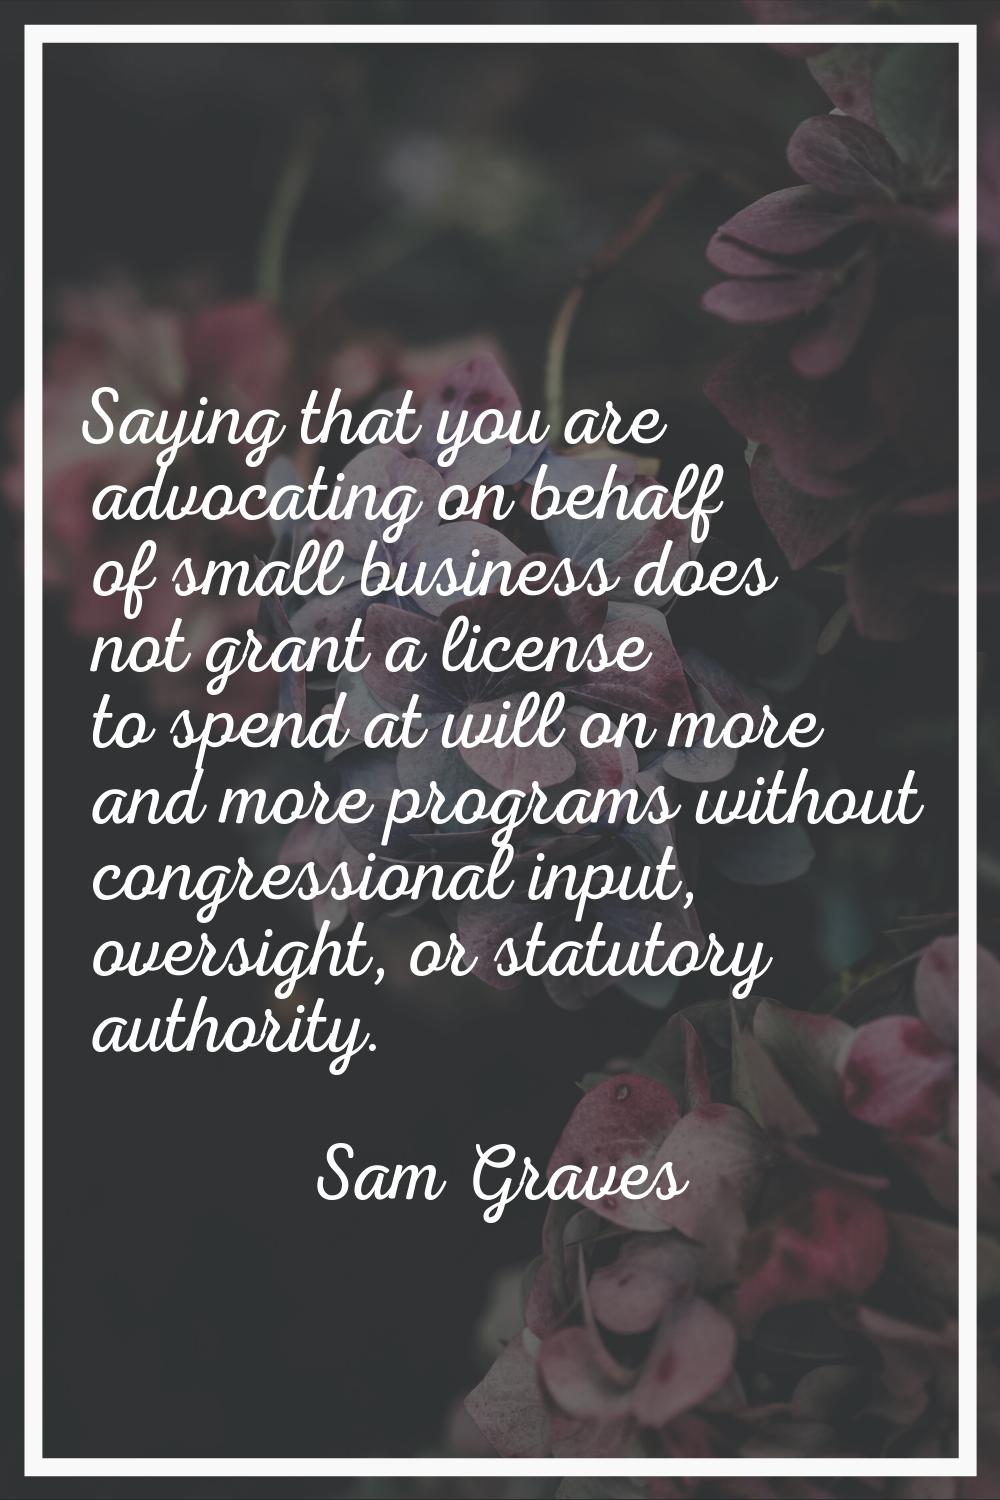 Saying that you are advocating on behalf of small business does not grant a license to spend at wil